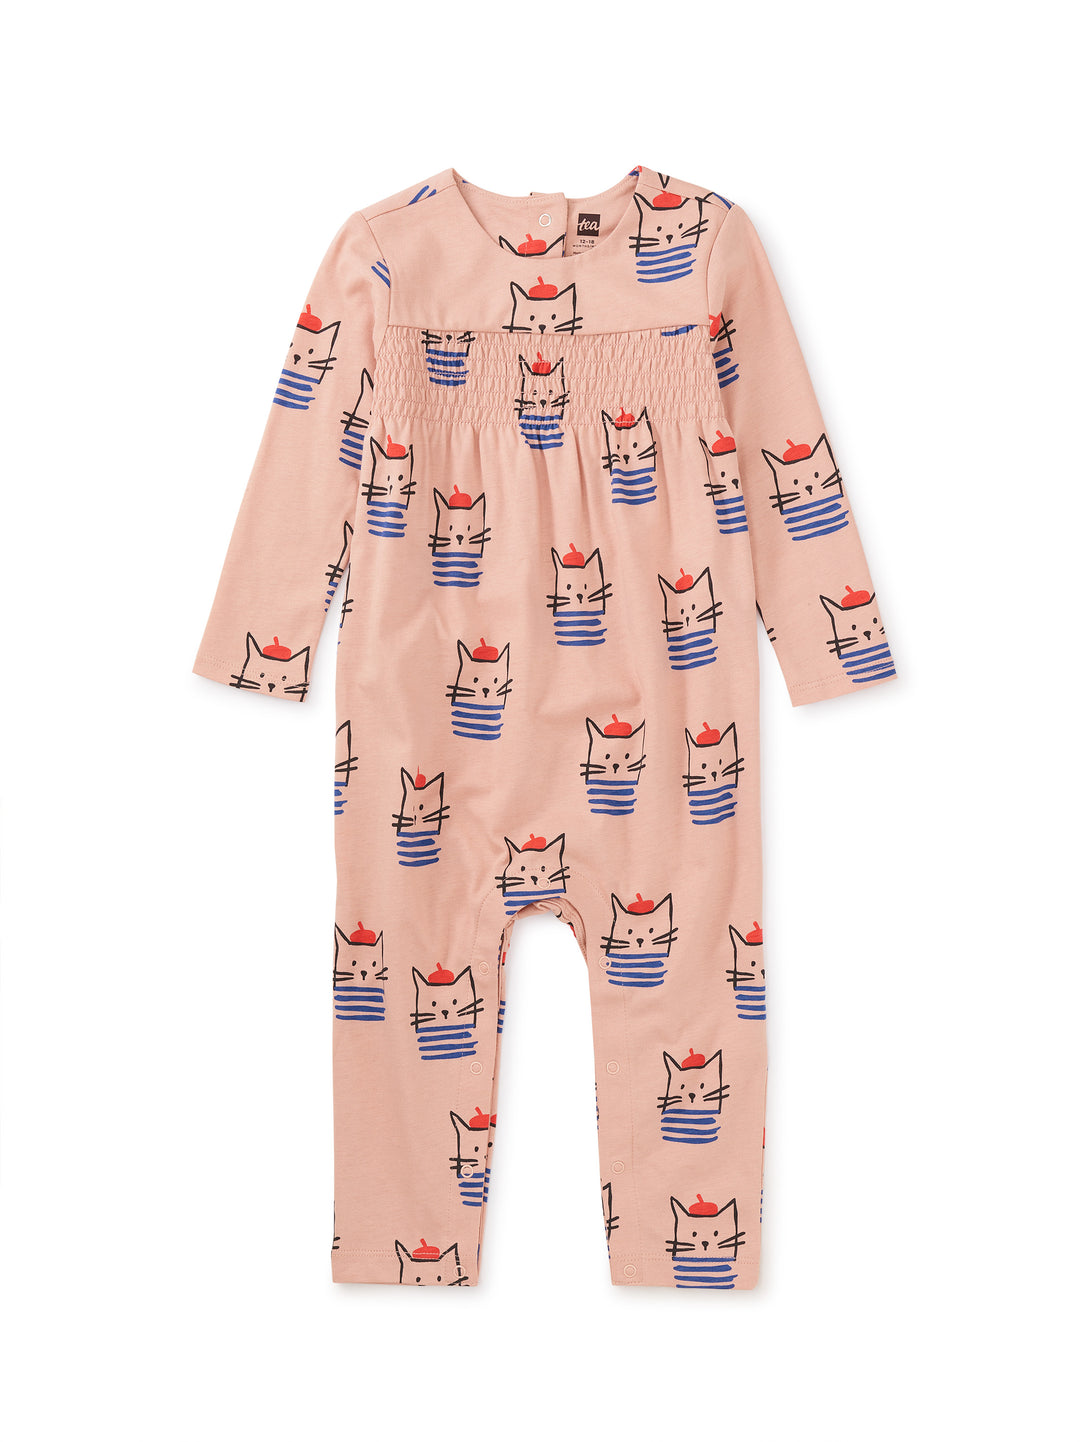 Tea Collection Smocked Chest Baby Romper, Chat et Chapeau |Mockingbird Baby & Kids